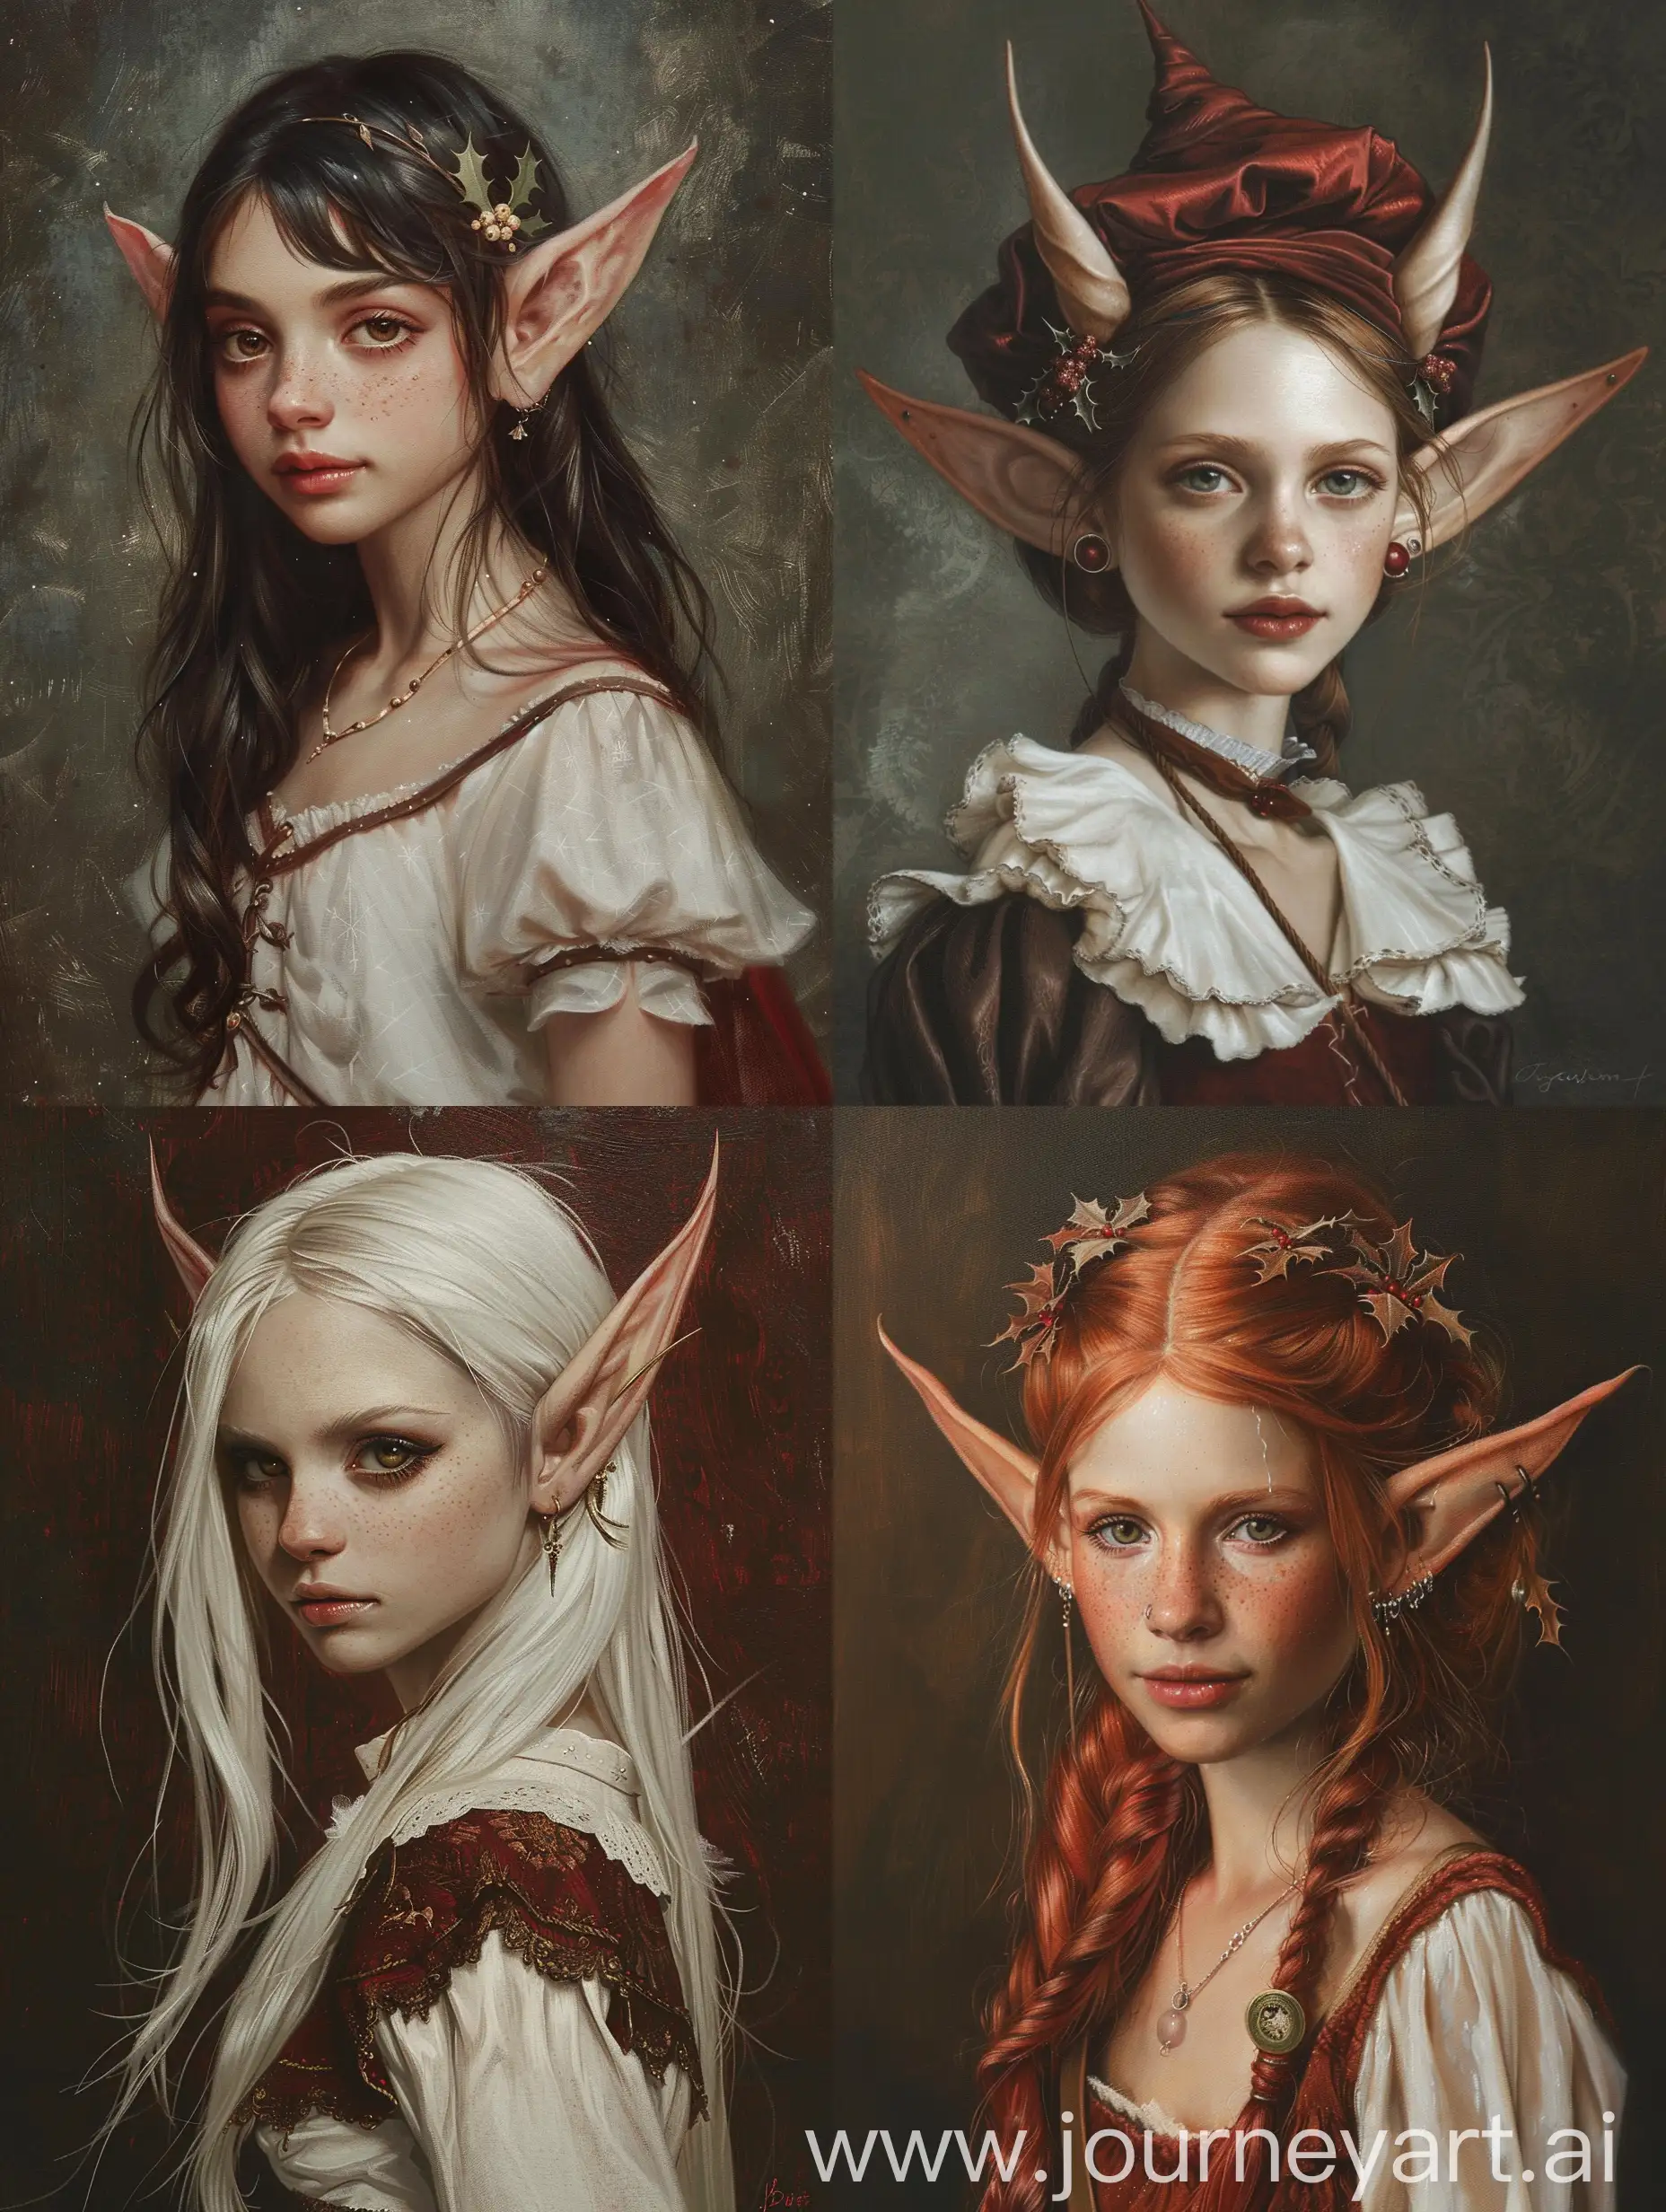 Waist-high photos, beautiful Christmas elven girl with hair gathered in a hairstyle, ears open pointed tip Edwardian era, oil paint, in the style of cyberpunk realism, light white and dark red